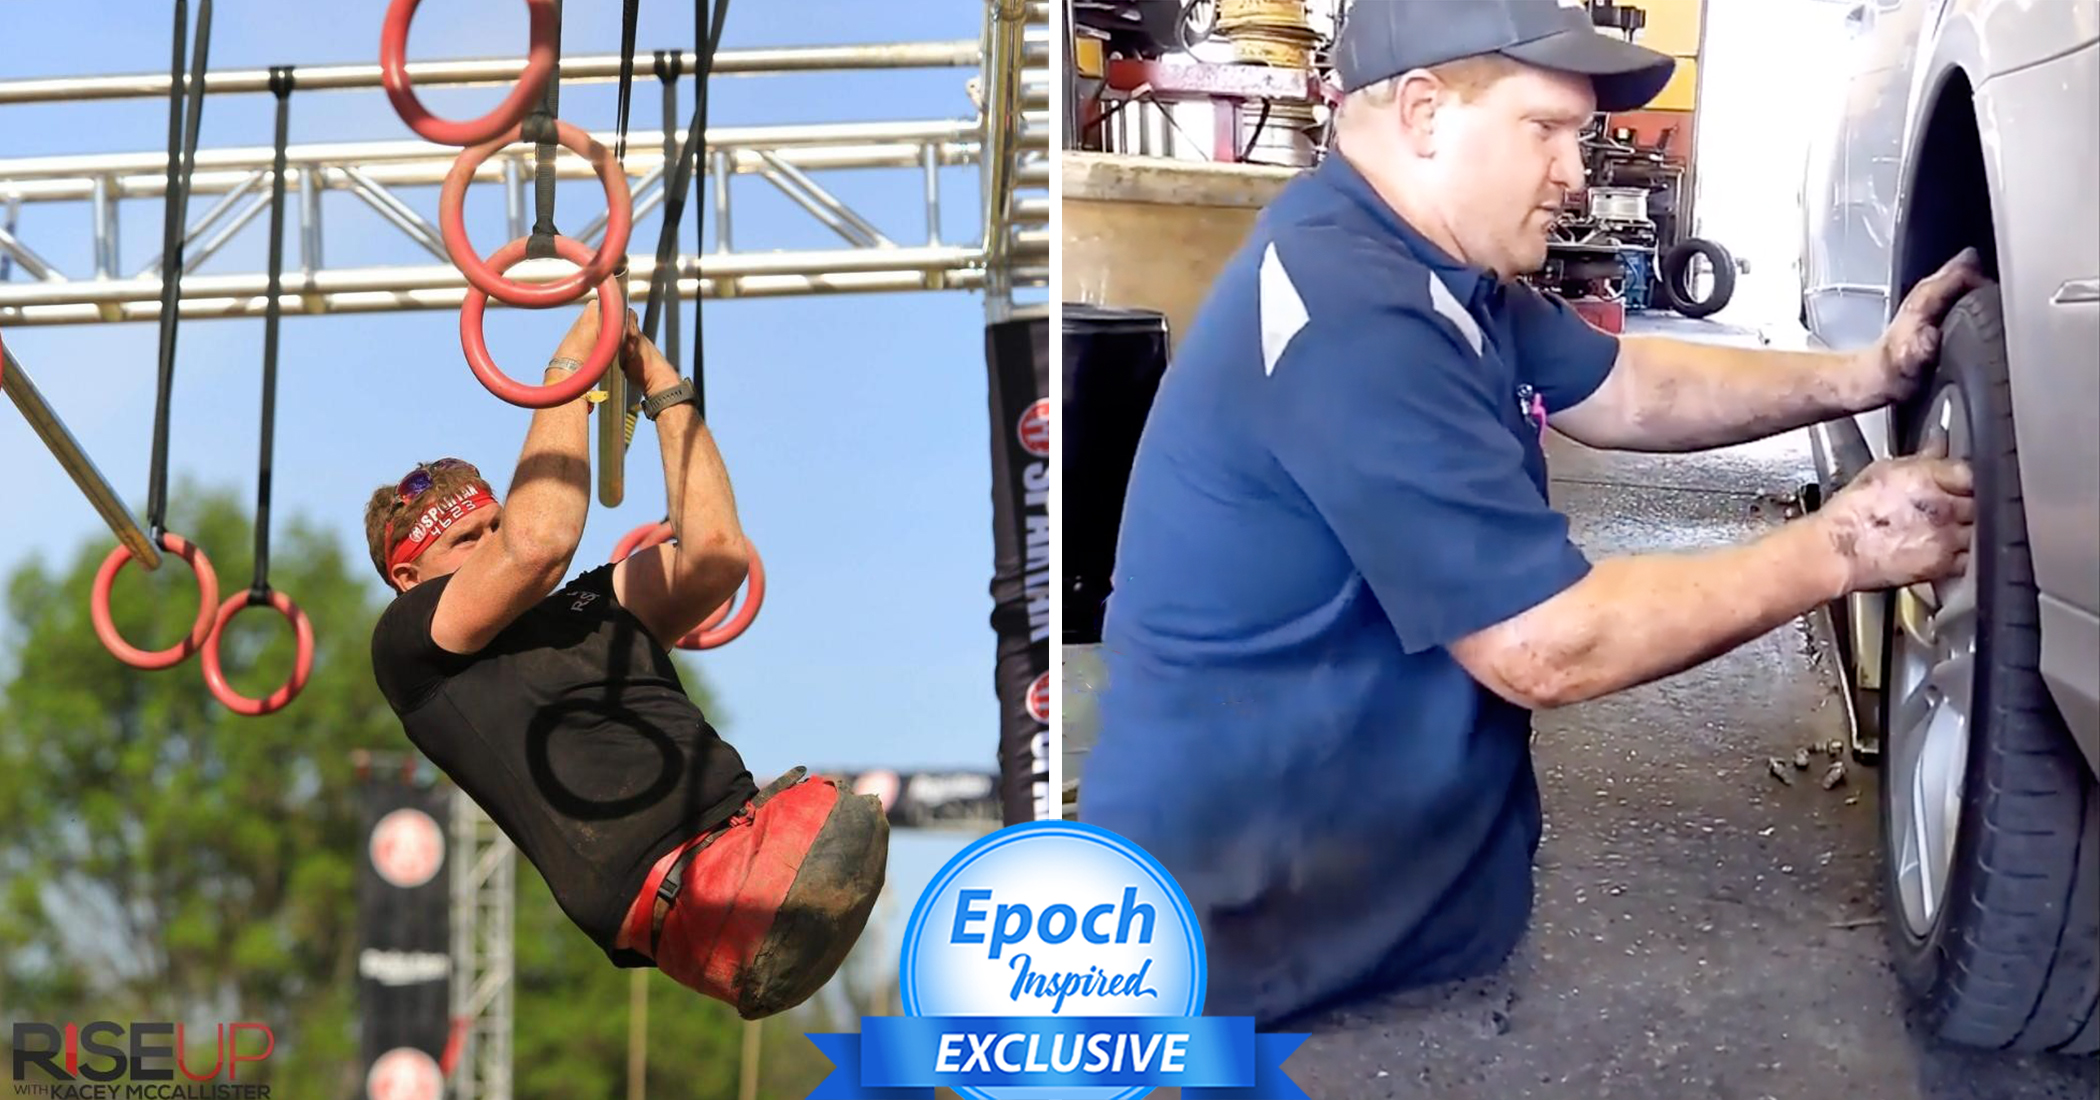 Double amputee lost his legs at age 6—but then he became an athlete, a mechanic, and a dad